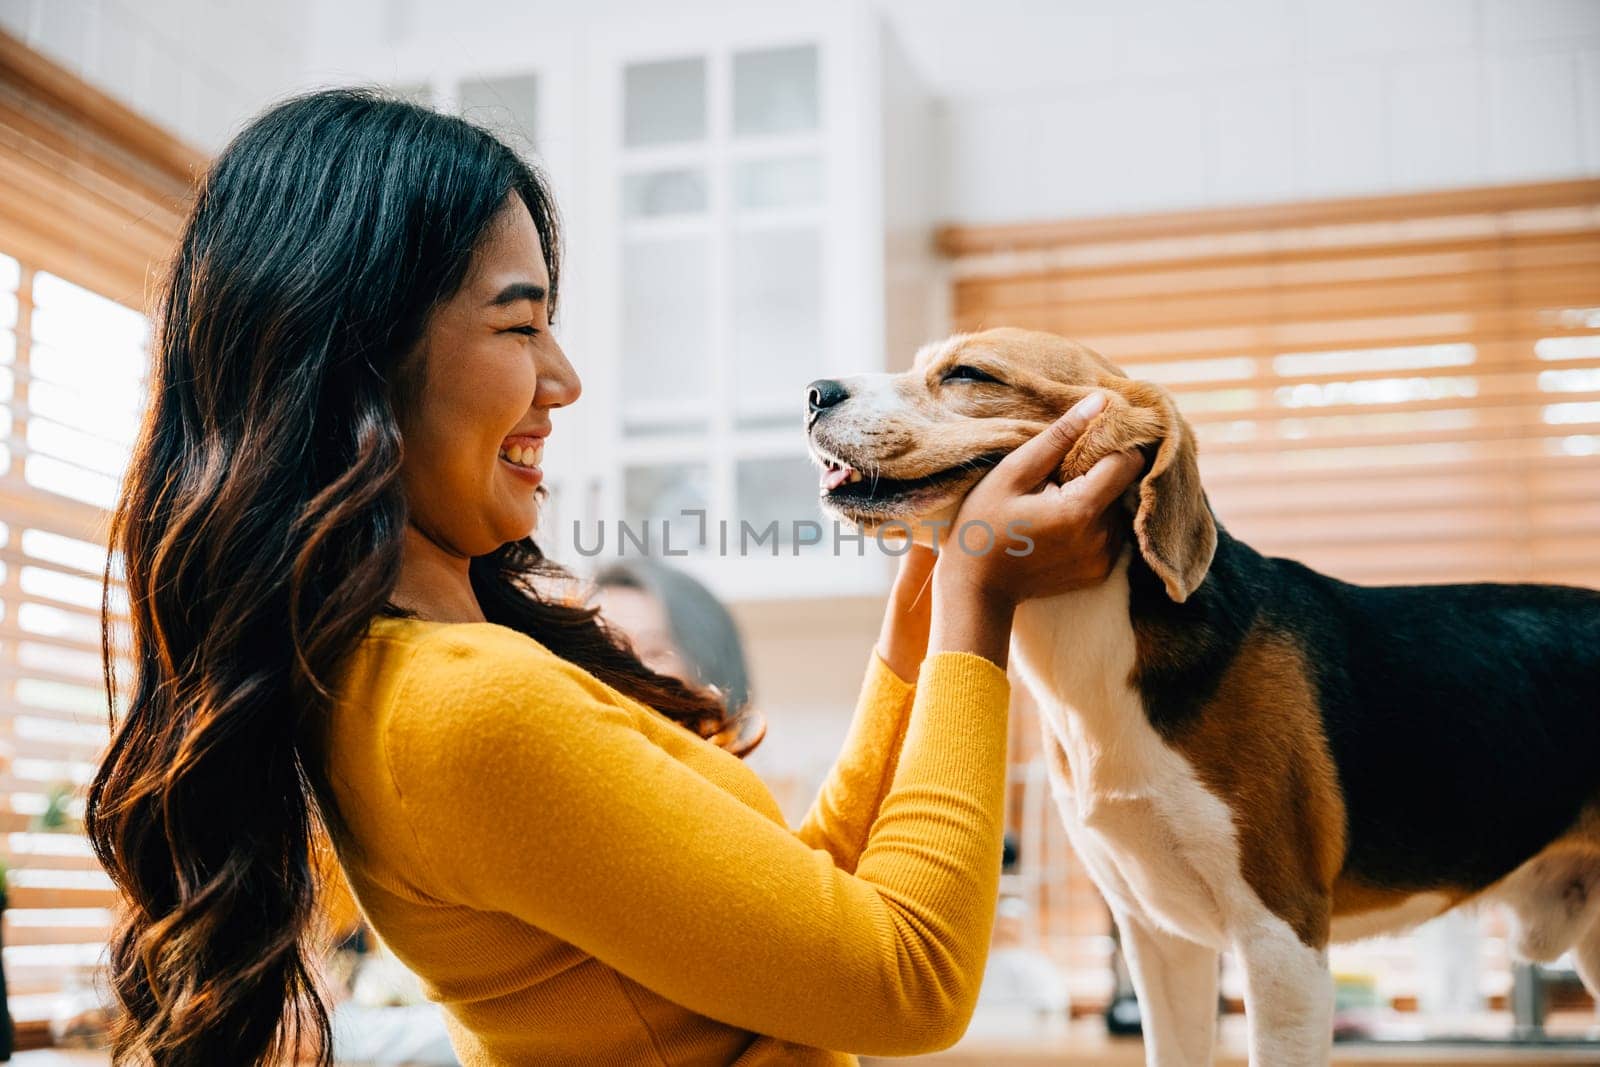 With her Beagle, an Asian woman embraces the kitchen as a place of happiness and play. Their joyful interaction exemplifies the care, togetherness, and family enjoyment of having a pet. Pet love by Sorapop